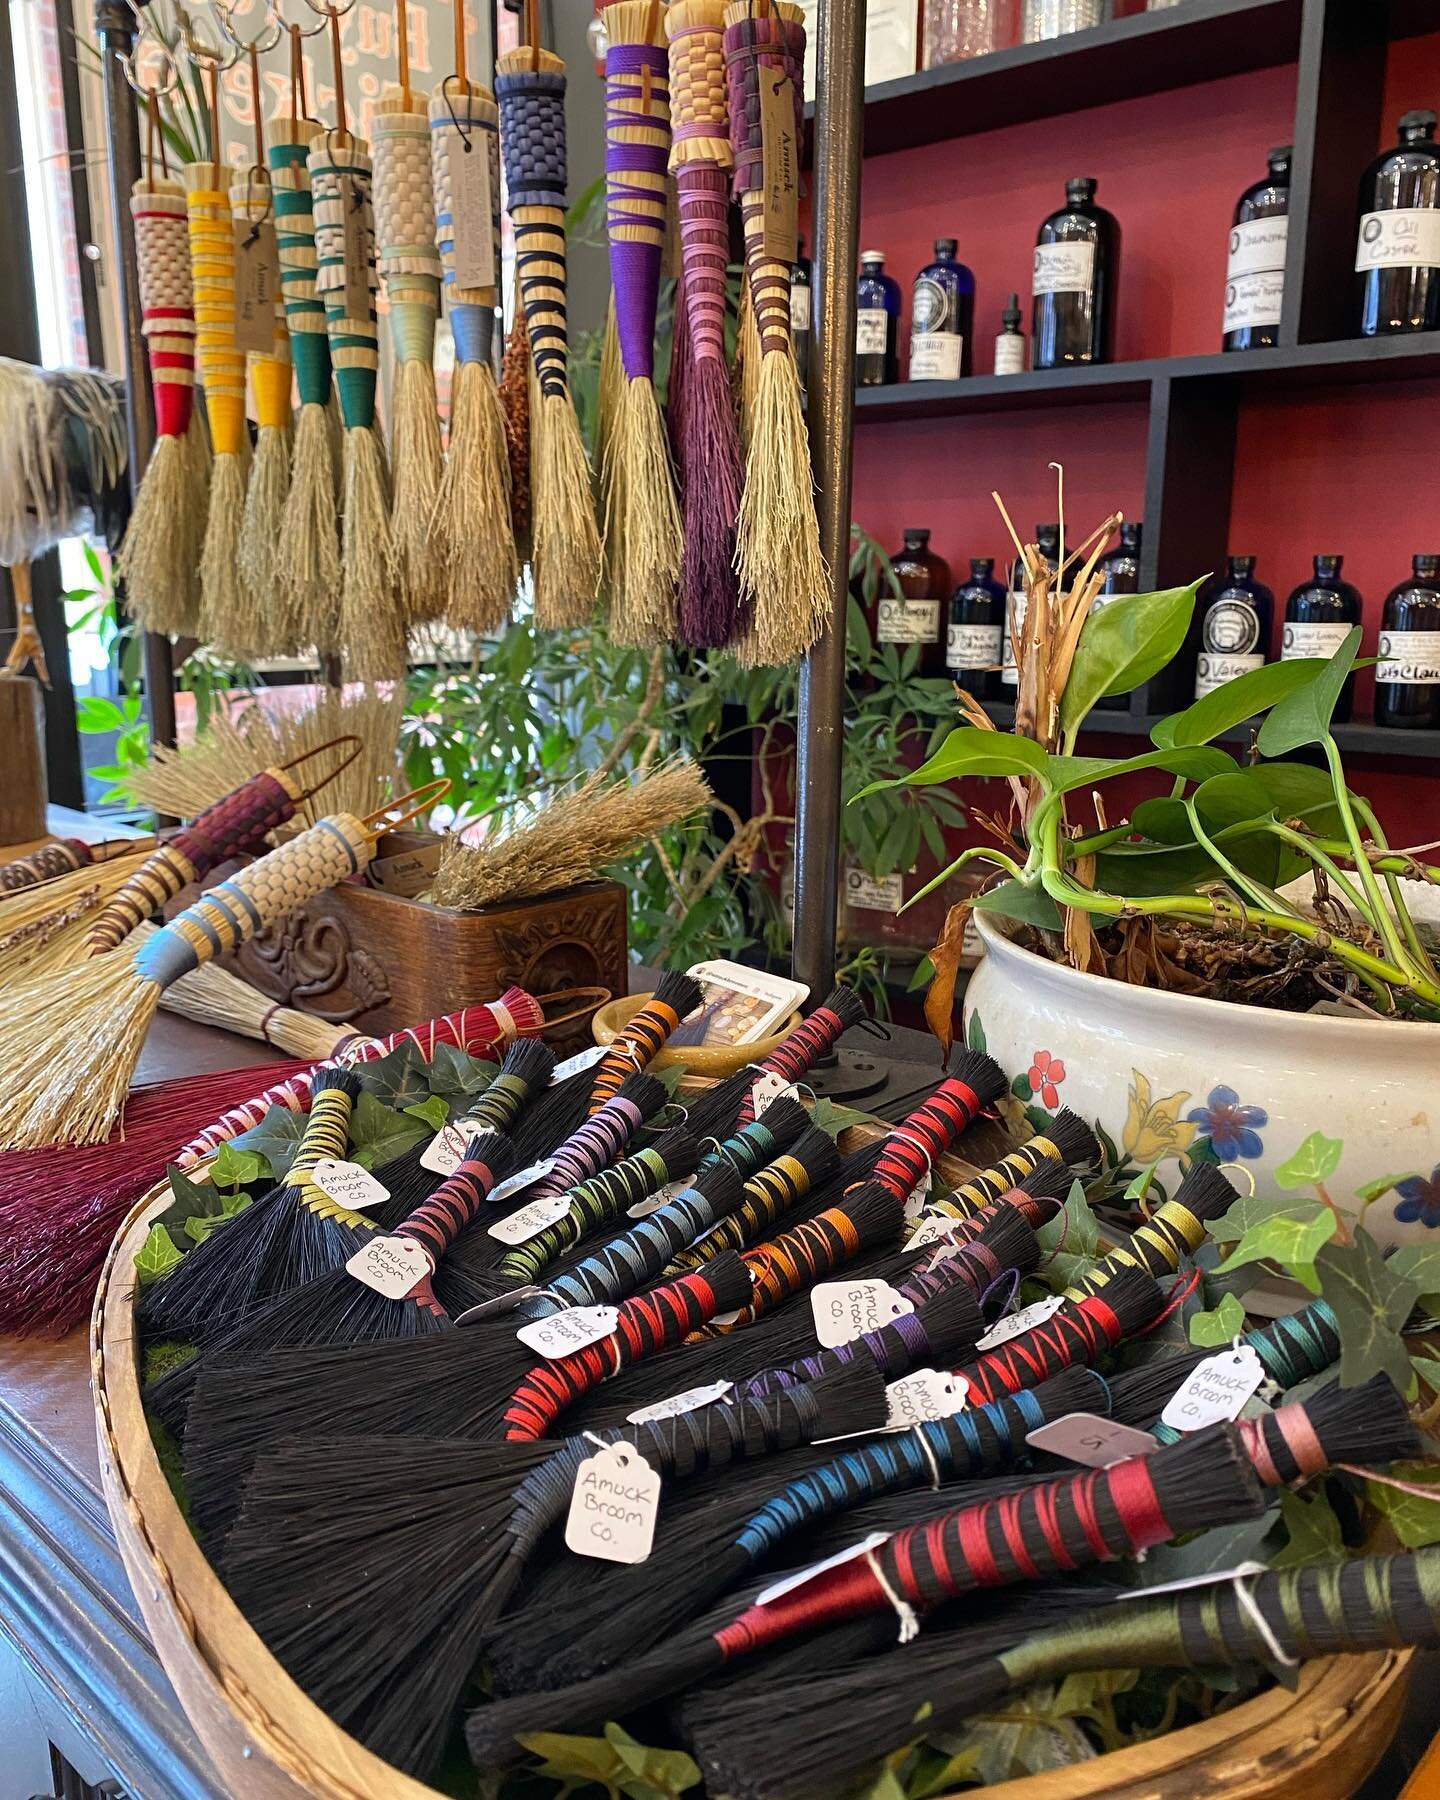 Just dropped a fresh batch of brooms off at @hive_and_forge. Make your spring cleaning a bit more magical and fun with a handmade broom! Swing through and see all the amazing new artists that have joined the collective this year 💜